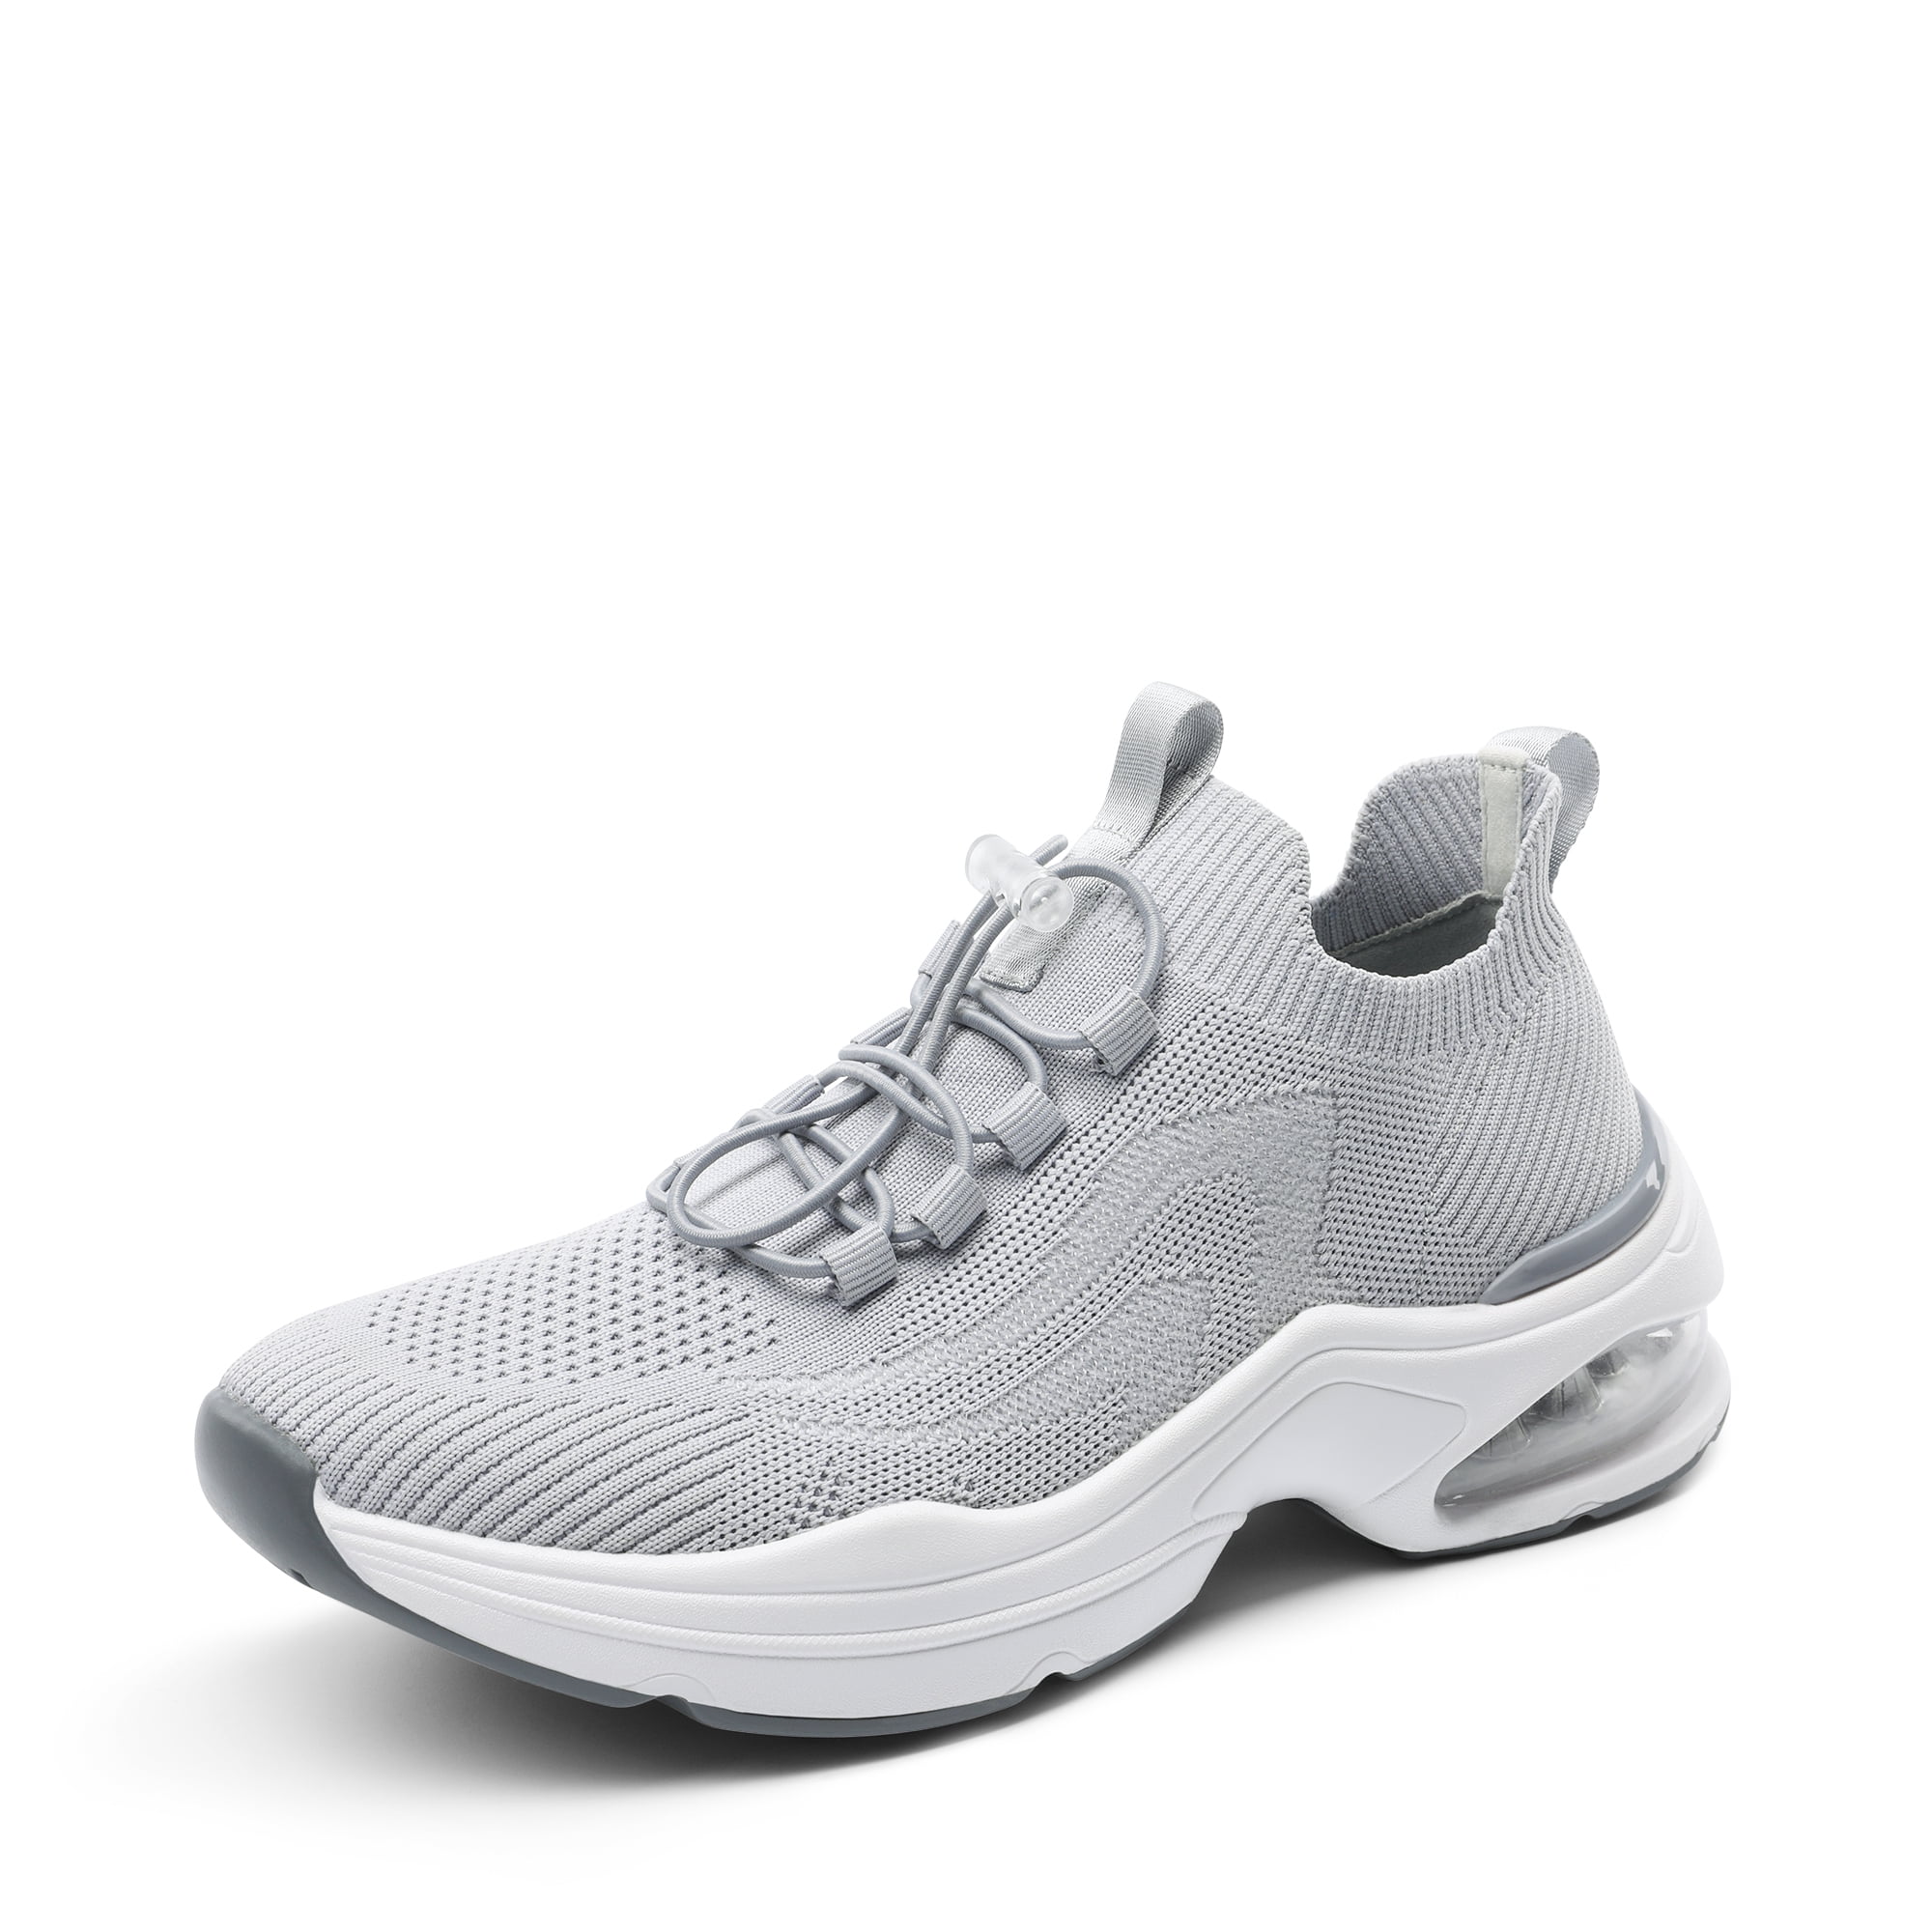 Top more than 157 air step shoes online best